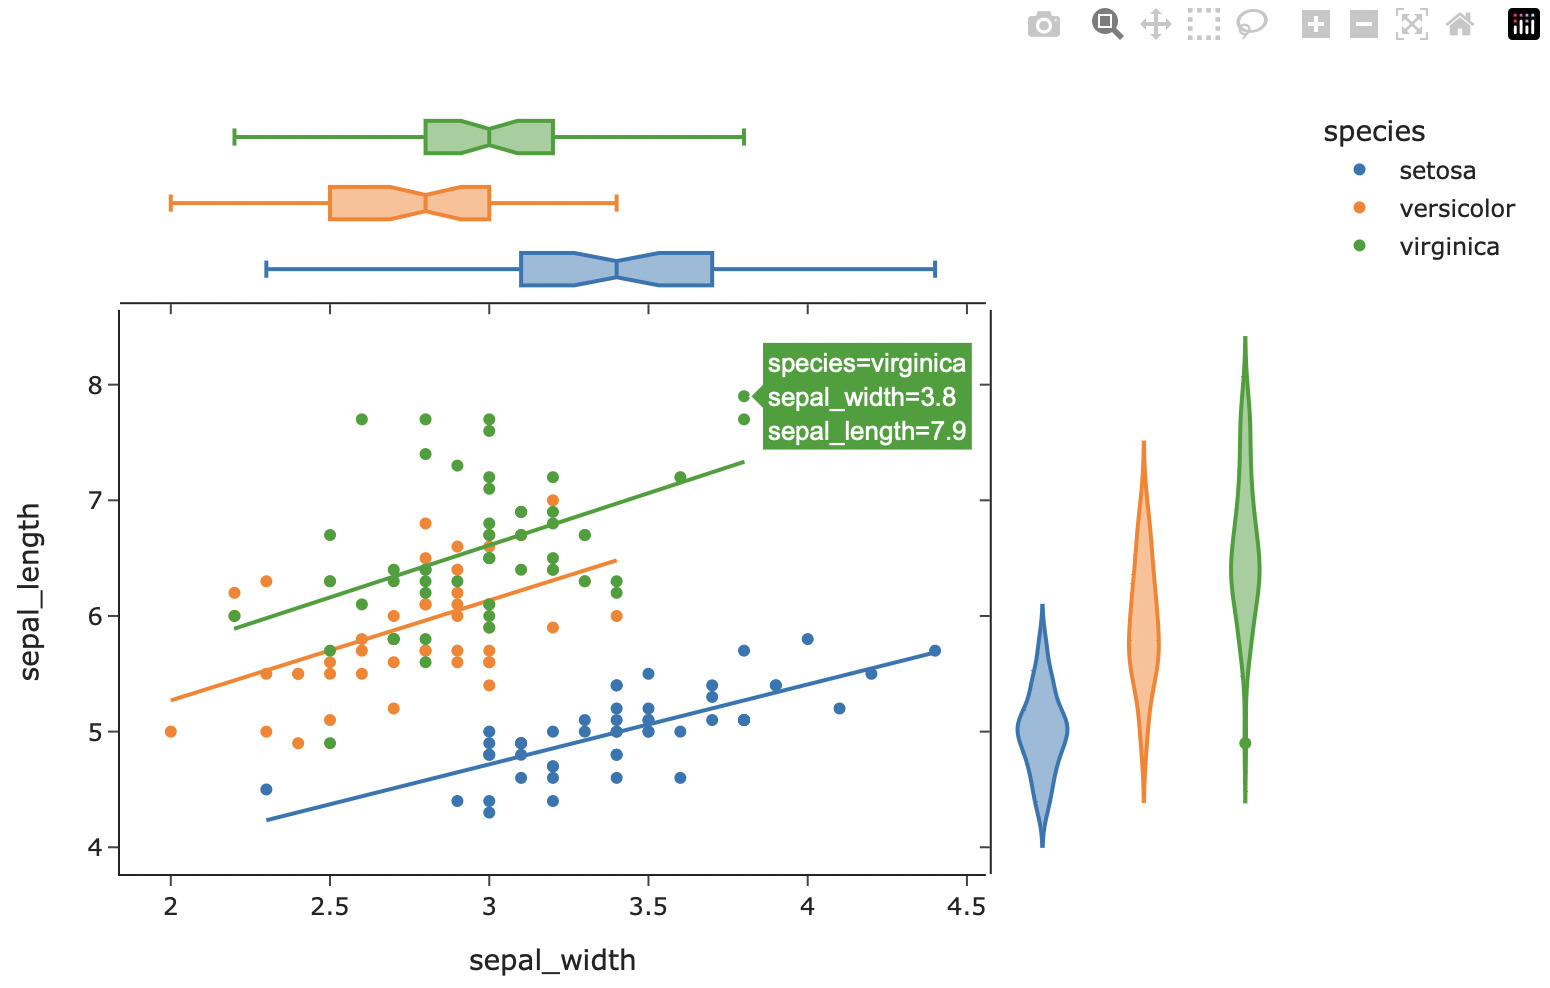 Static image of an interactive chart that shows data from the iris dataset as a scatterplot with a regression line through each variable, box plots, and violin plots. The species are setosa, versicolor, and virginica and the variables are sepal width on the x axis and sepal length on the y axis.